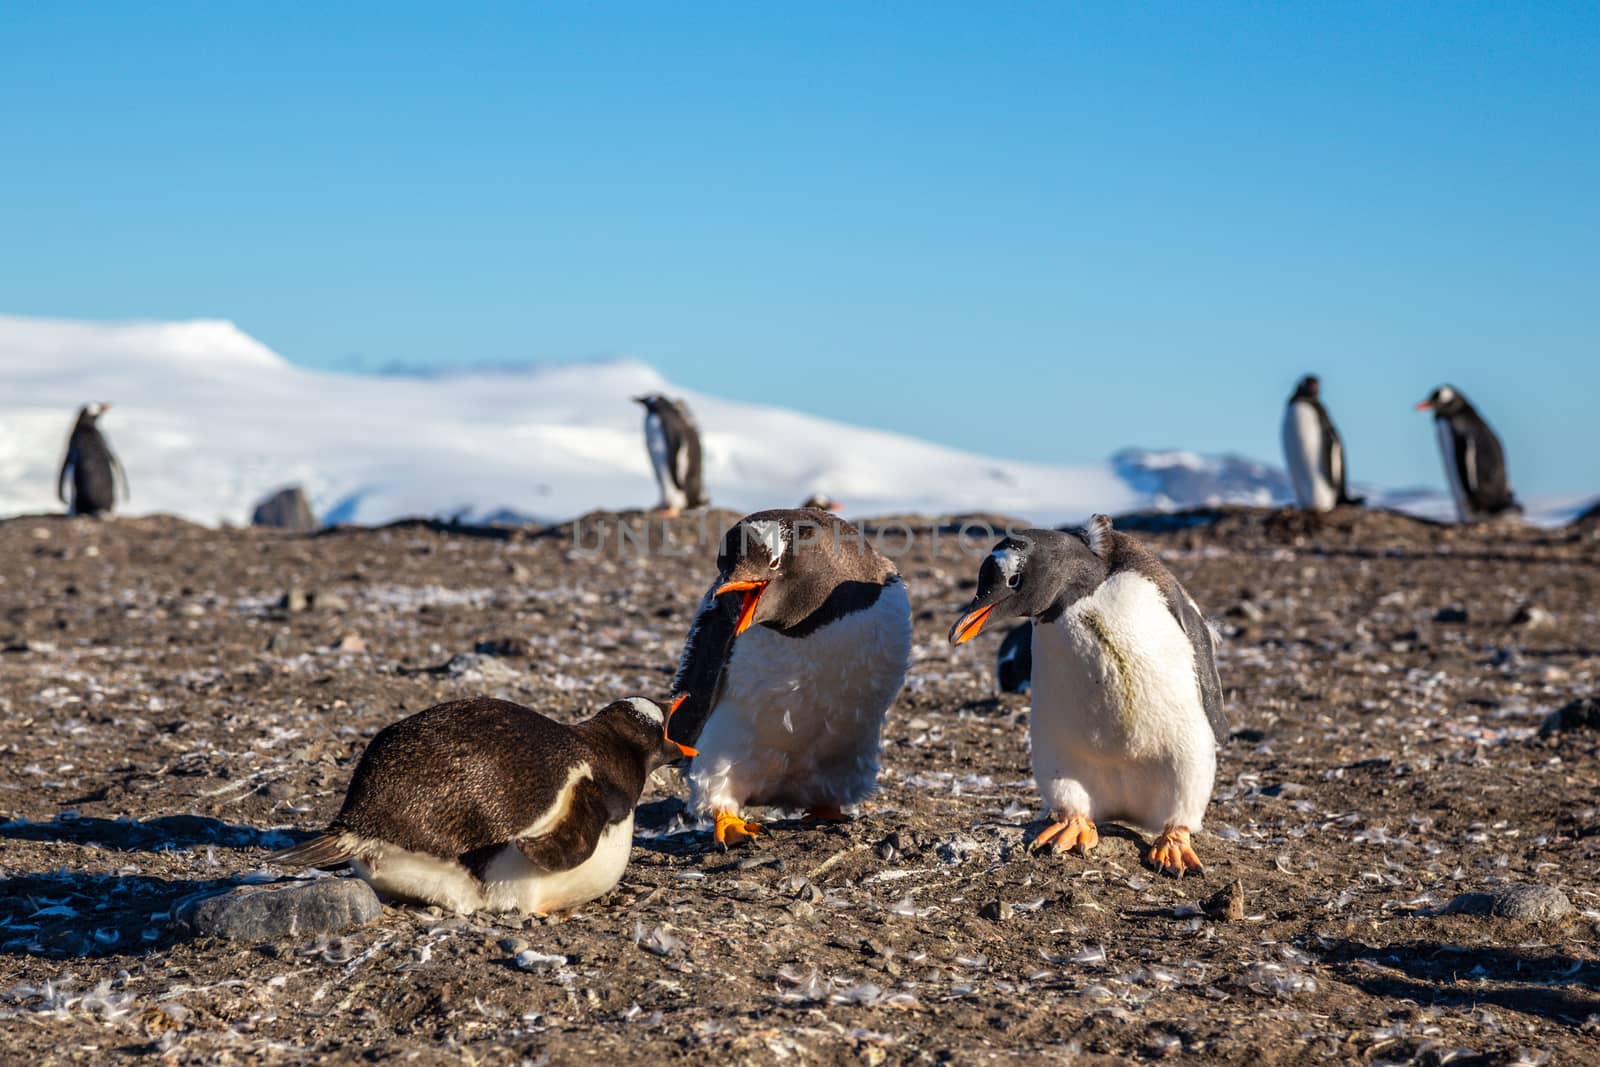 Gentoo penguin family conflict at the Barrientos Island, Antarct by ambeon